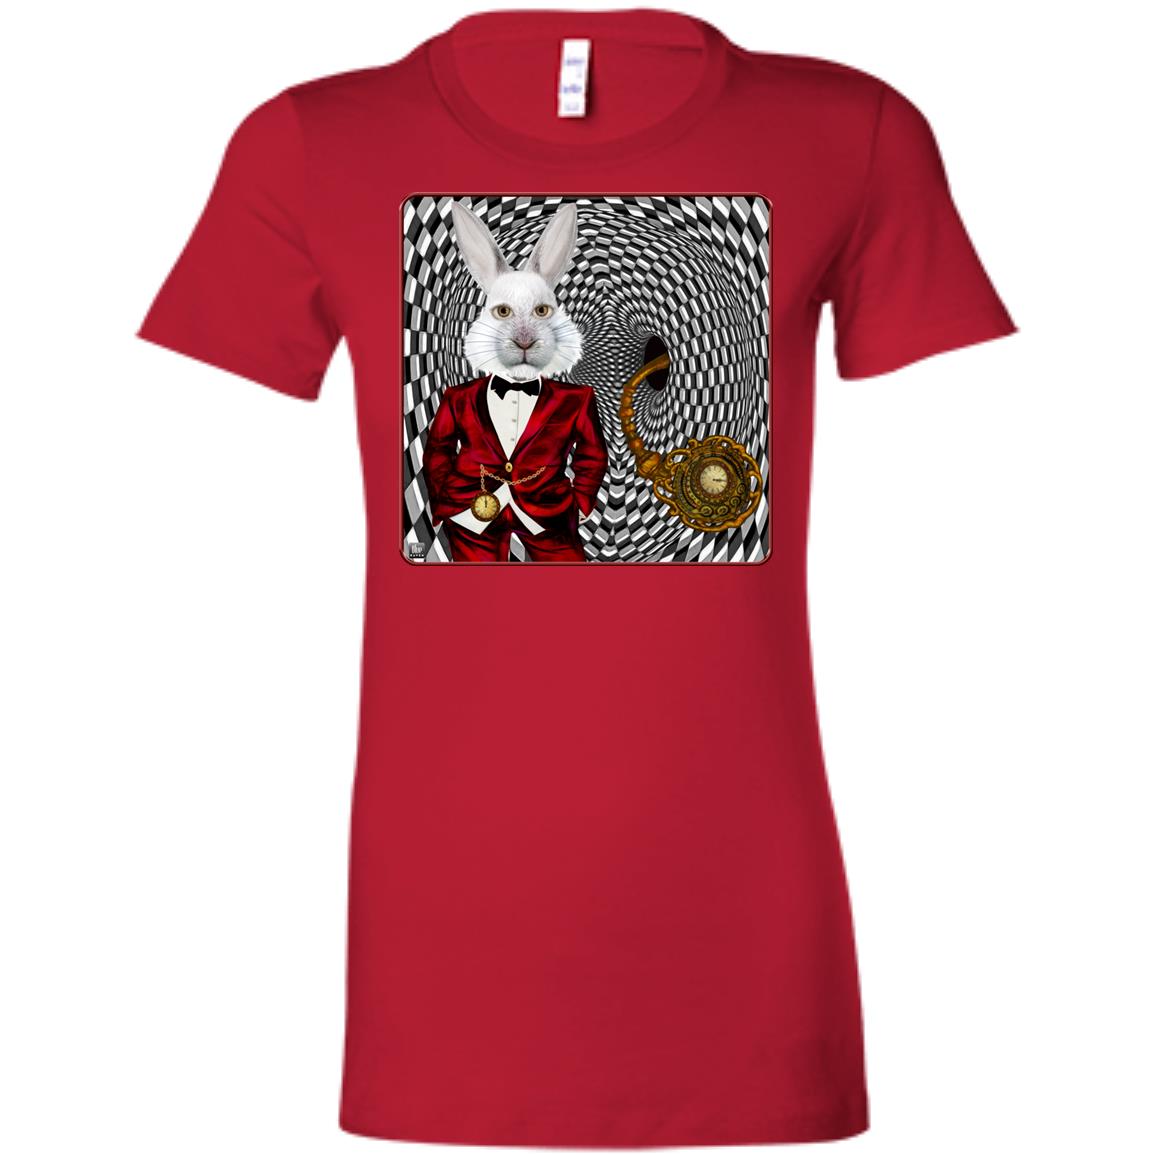 portrait of the white rabbit - Women's Fitted T-Shirt